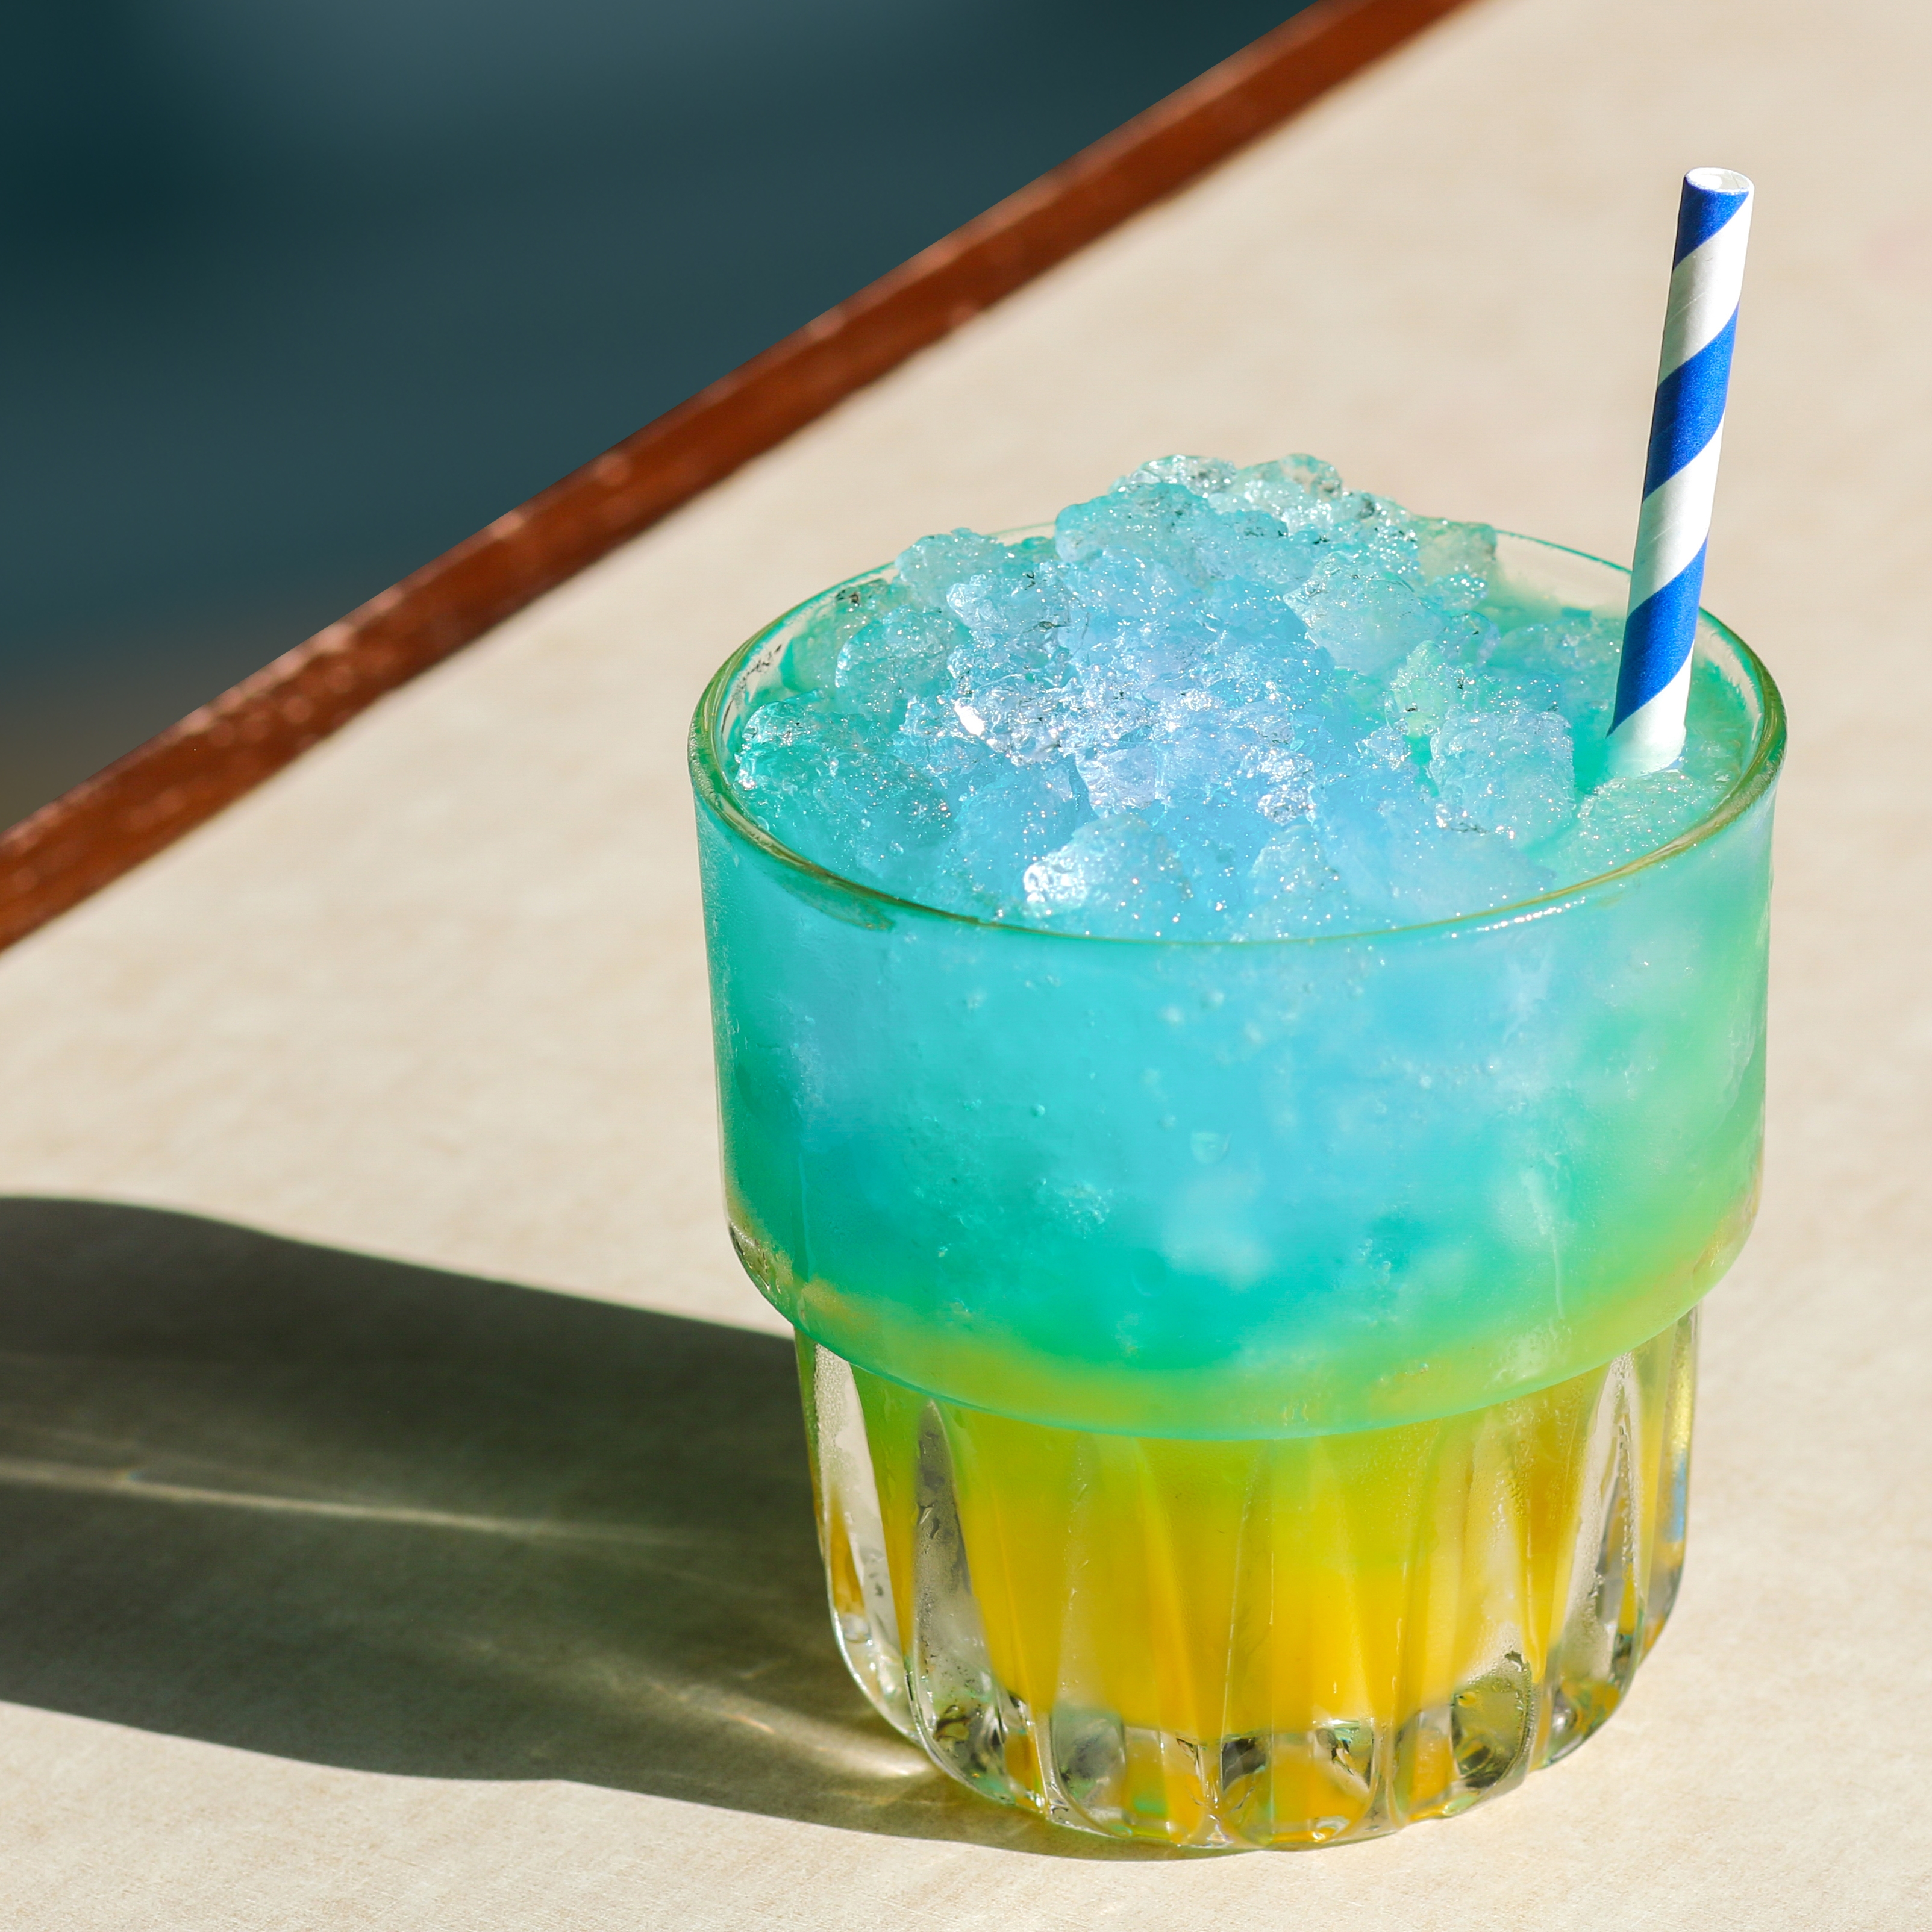 Blue Bay cocktail for Ukraine on sunny table